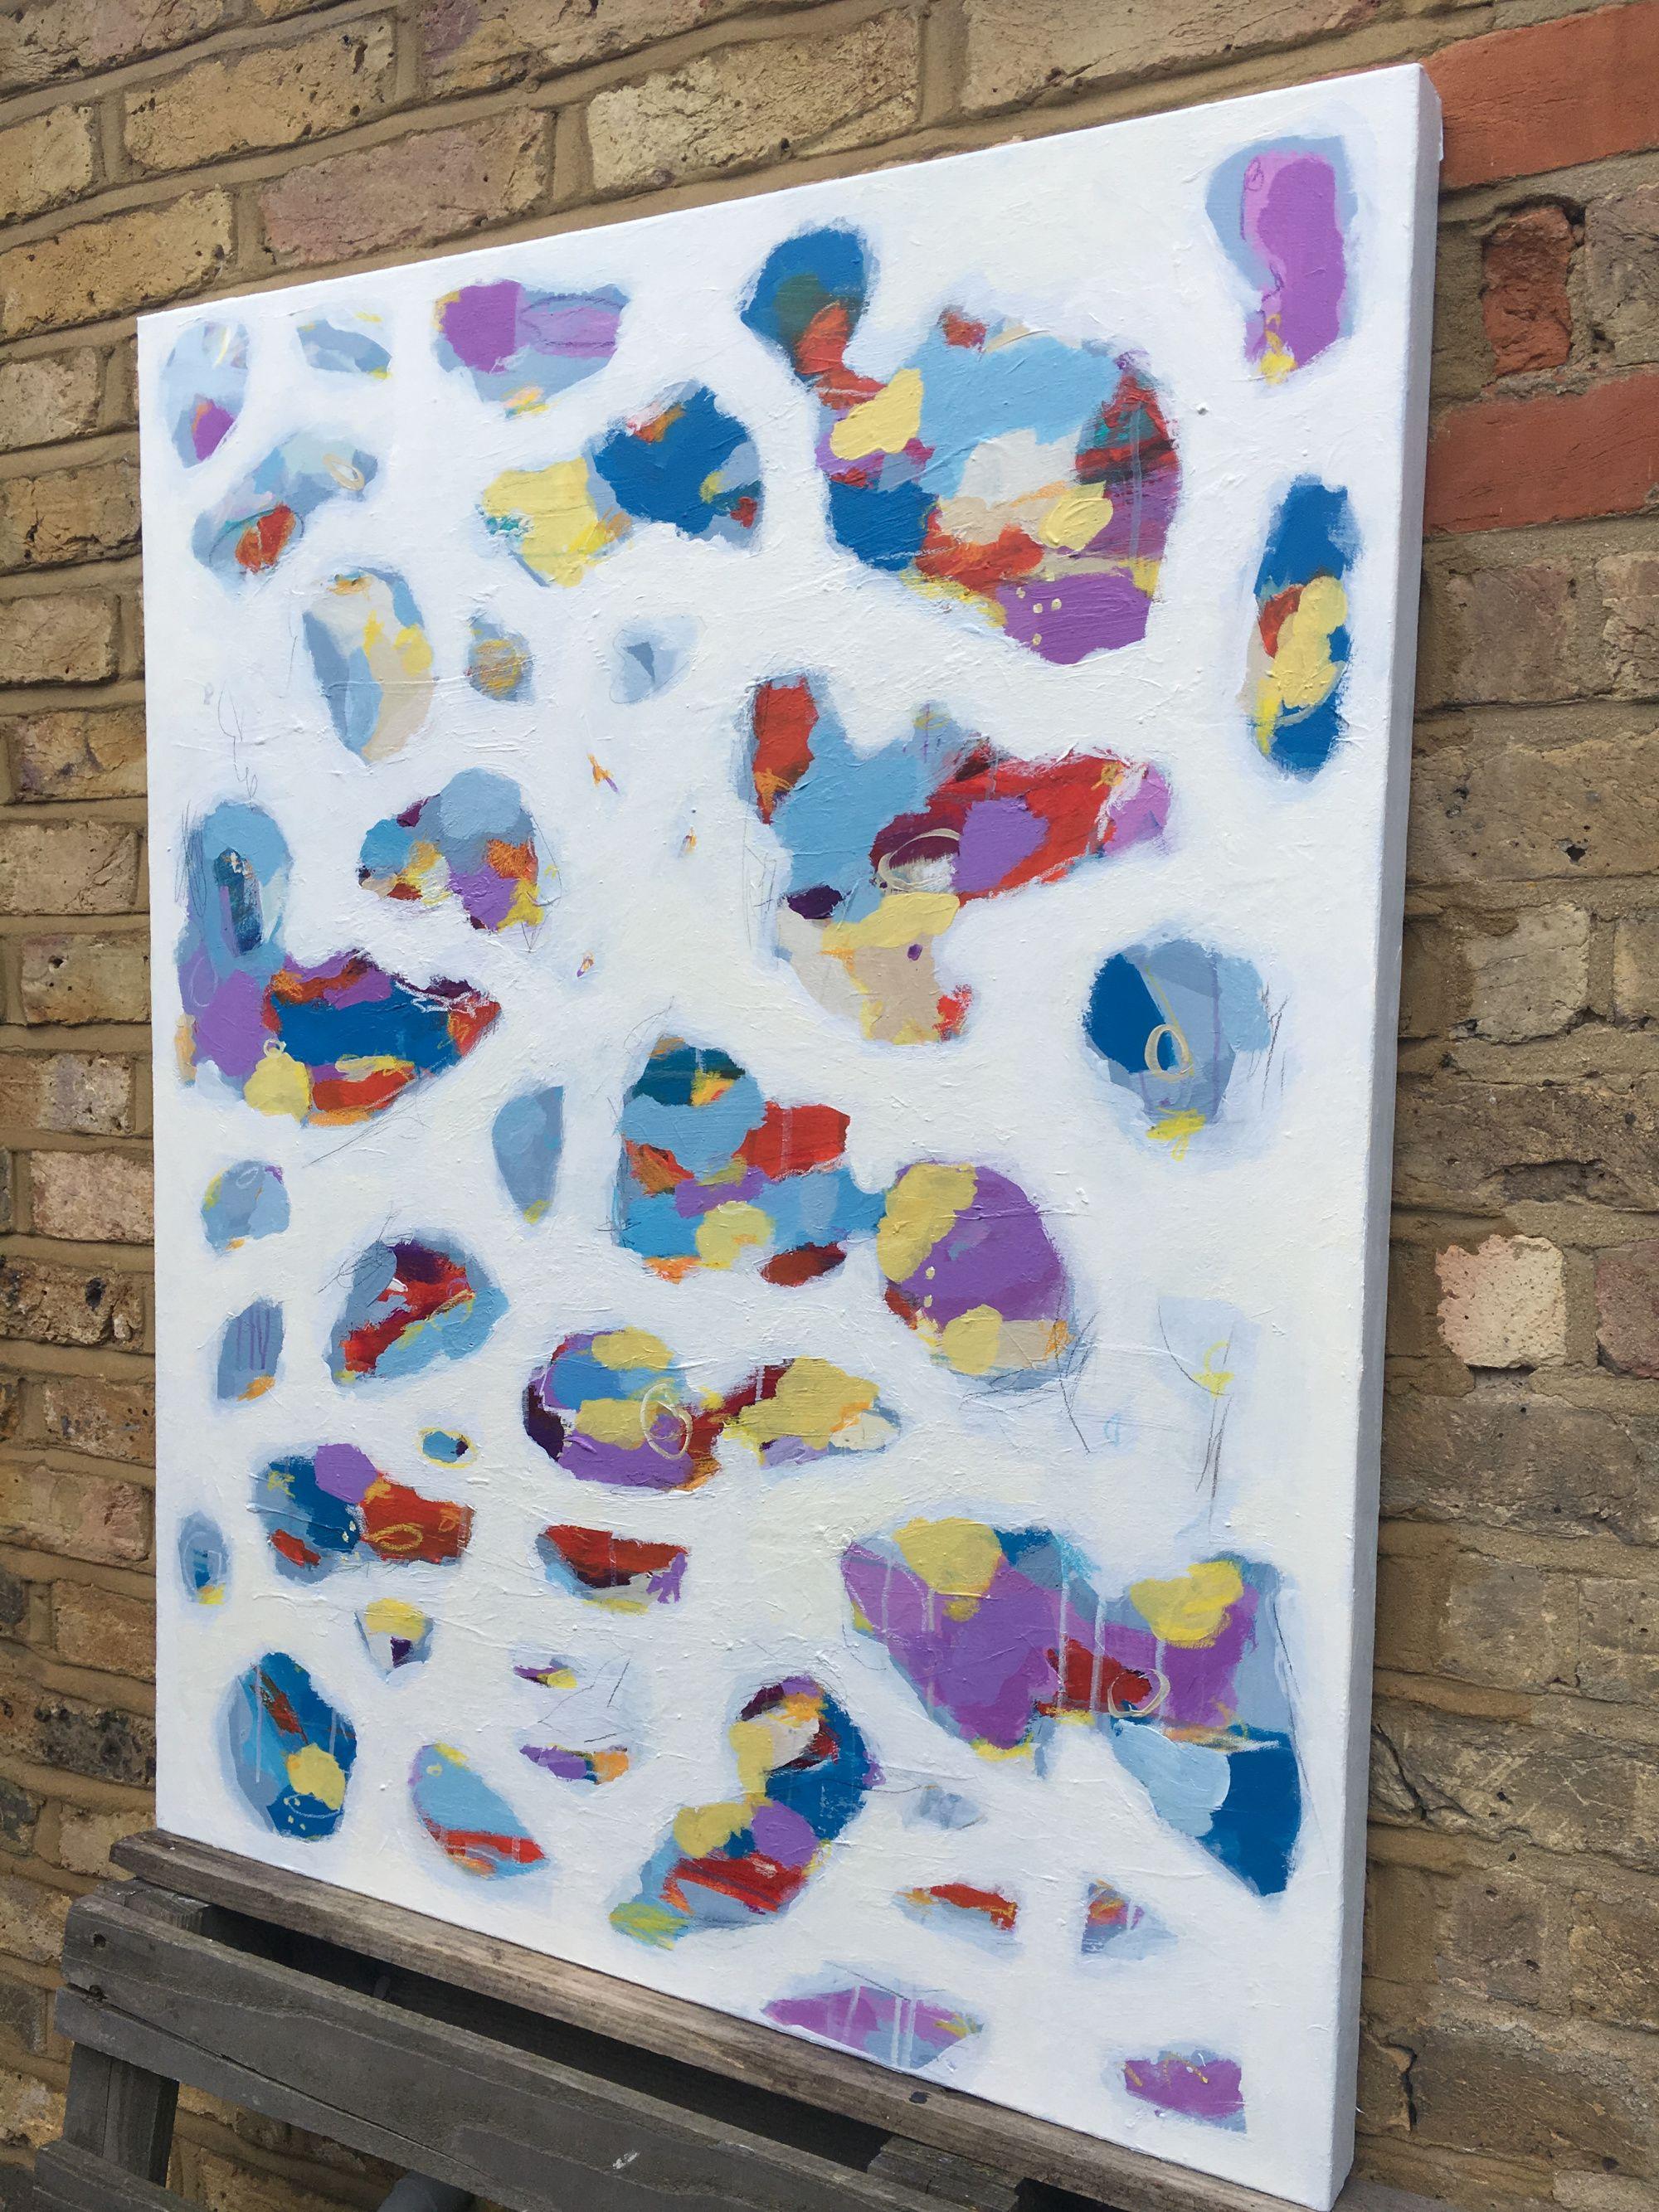 A dynamic, abstract painting inspired by Elizabeth's Bishop's poem 'I am in need of Music', with the idea of sounds floating through the air. The painting was carefully built over many layers and washes of paint. Lovely, pastel colours lend warmth